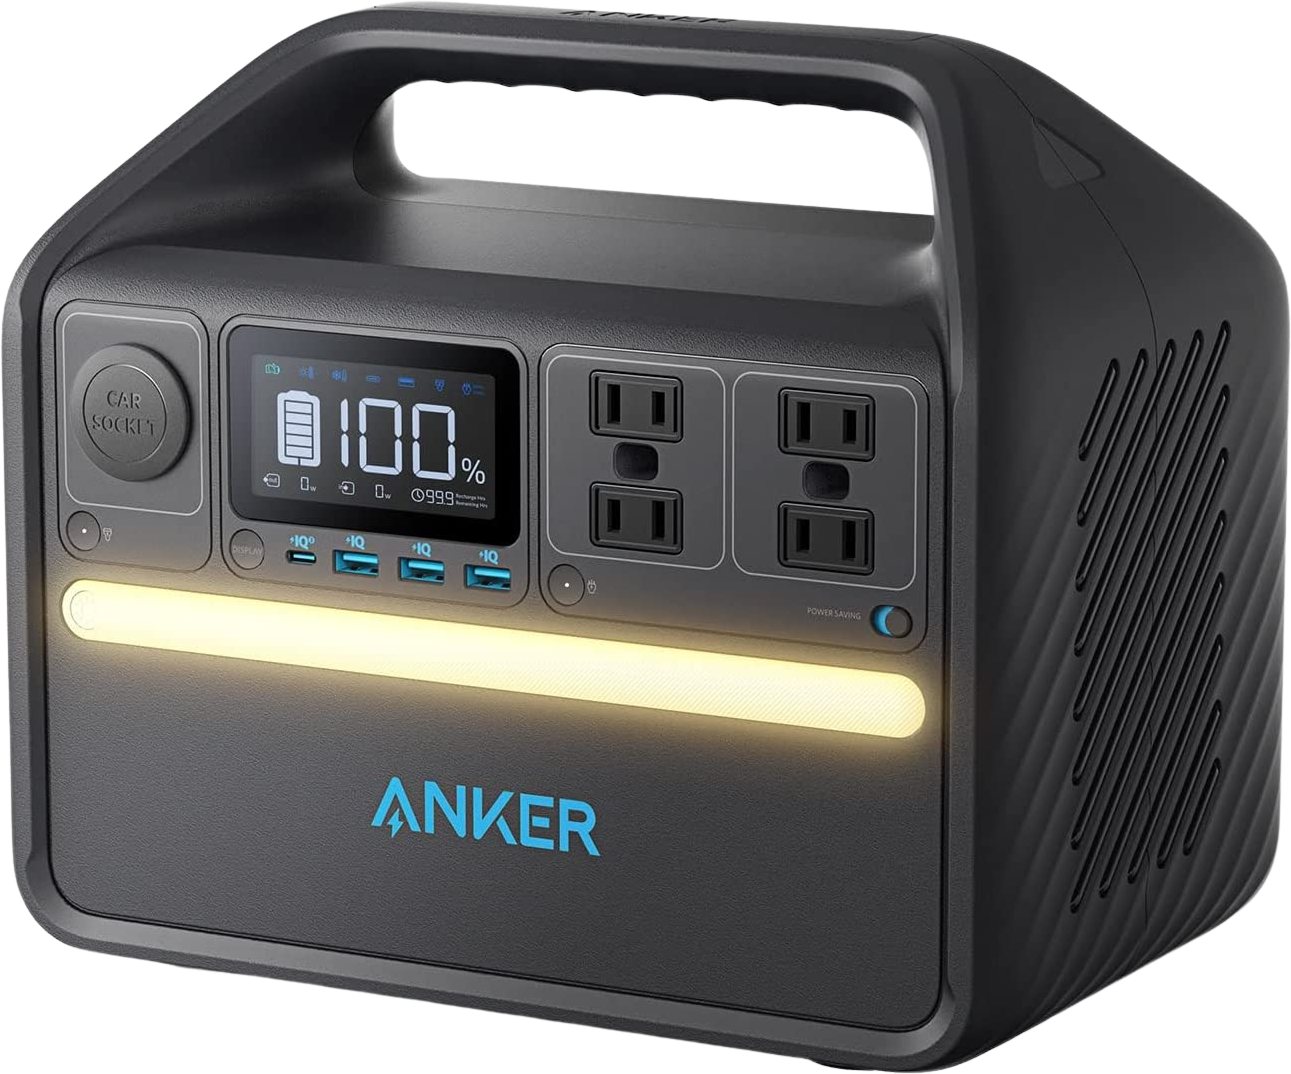 Anker, Anker 535 512WH/500W PowerHouse Portable Power Station Manufacturer RFB